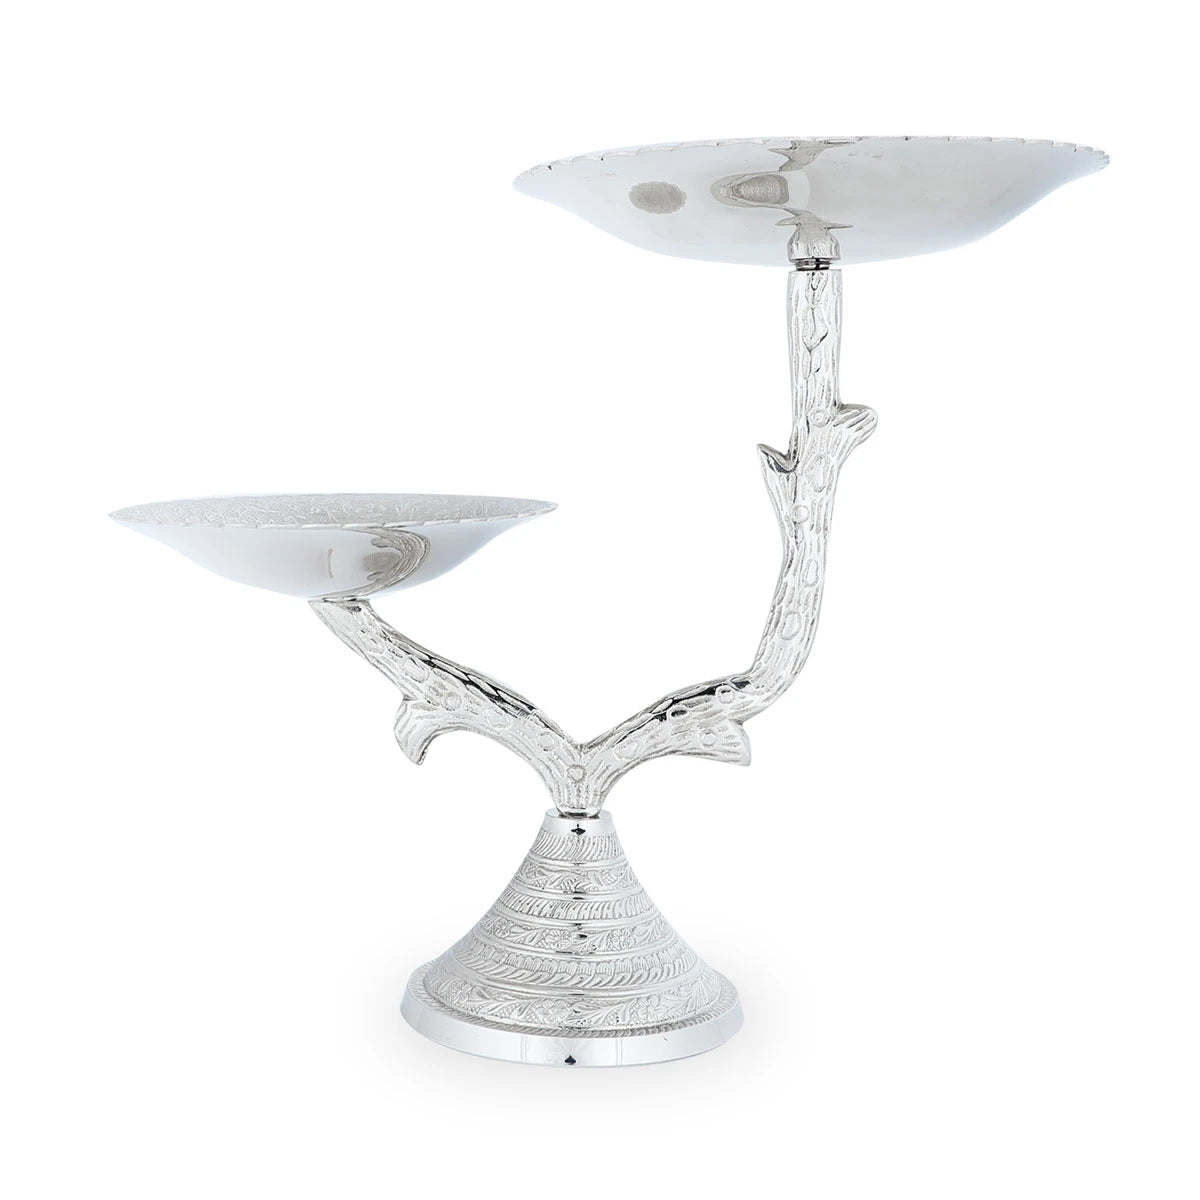 Front View of Branched Nickel Polished Silver Color Two-Tier Fruit Stand